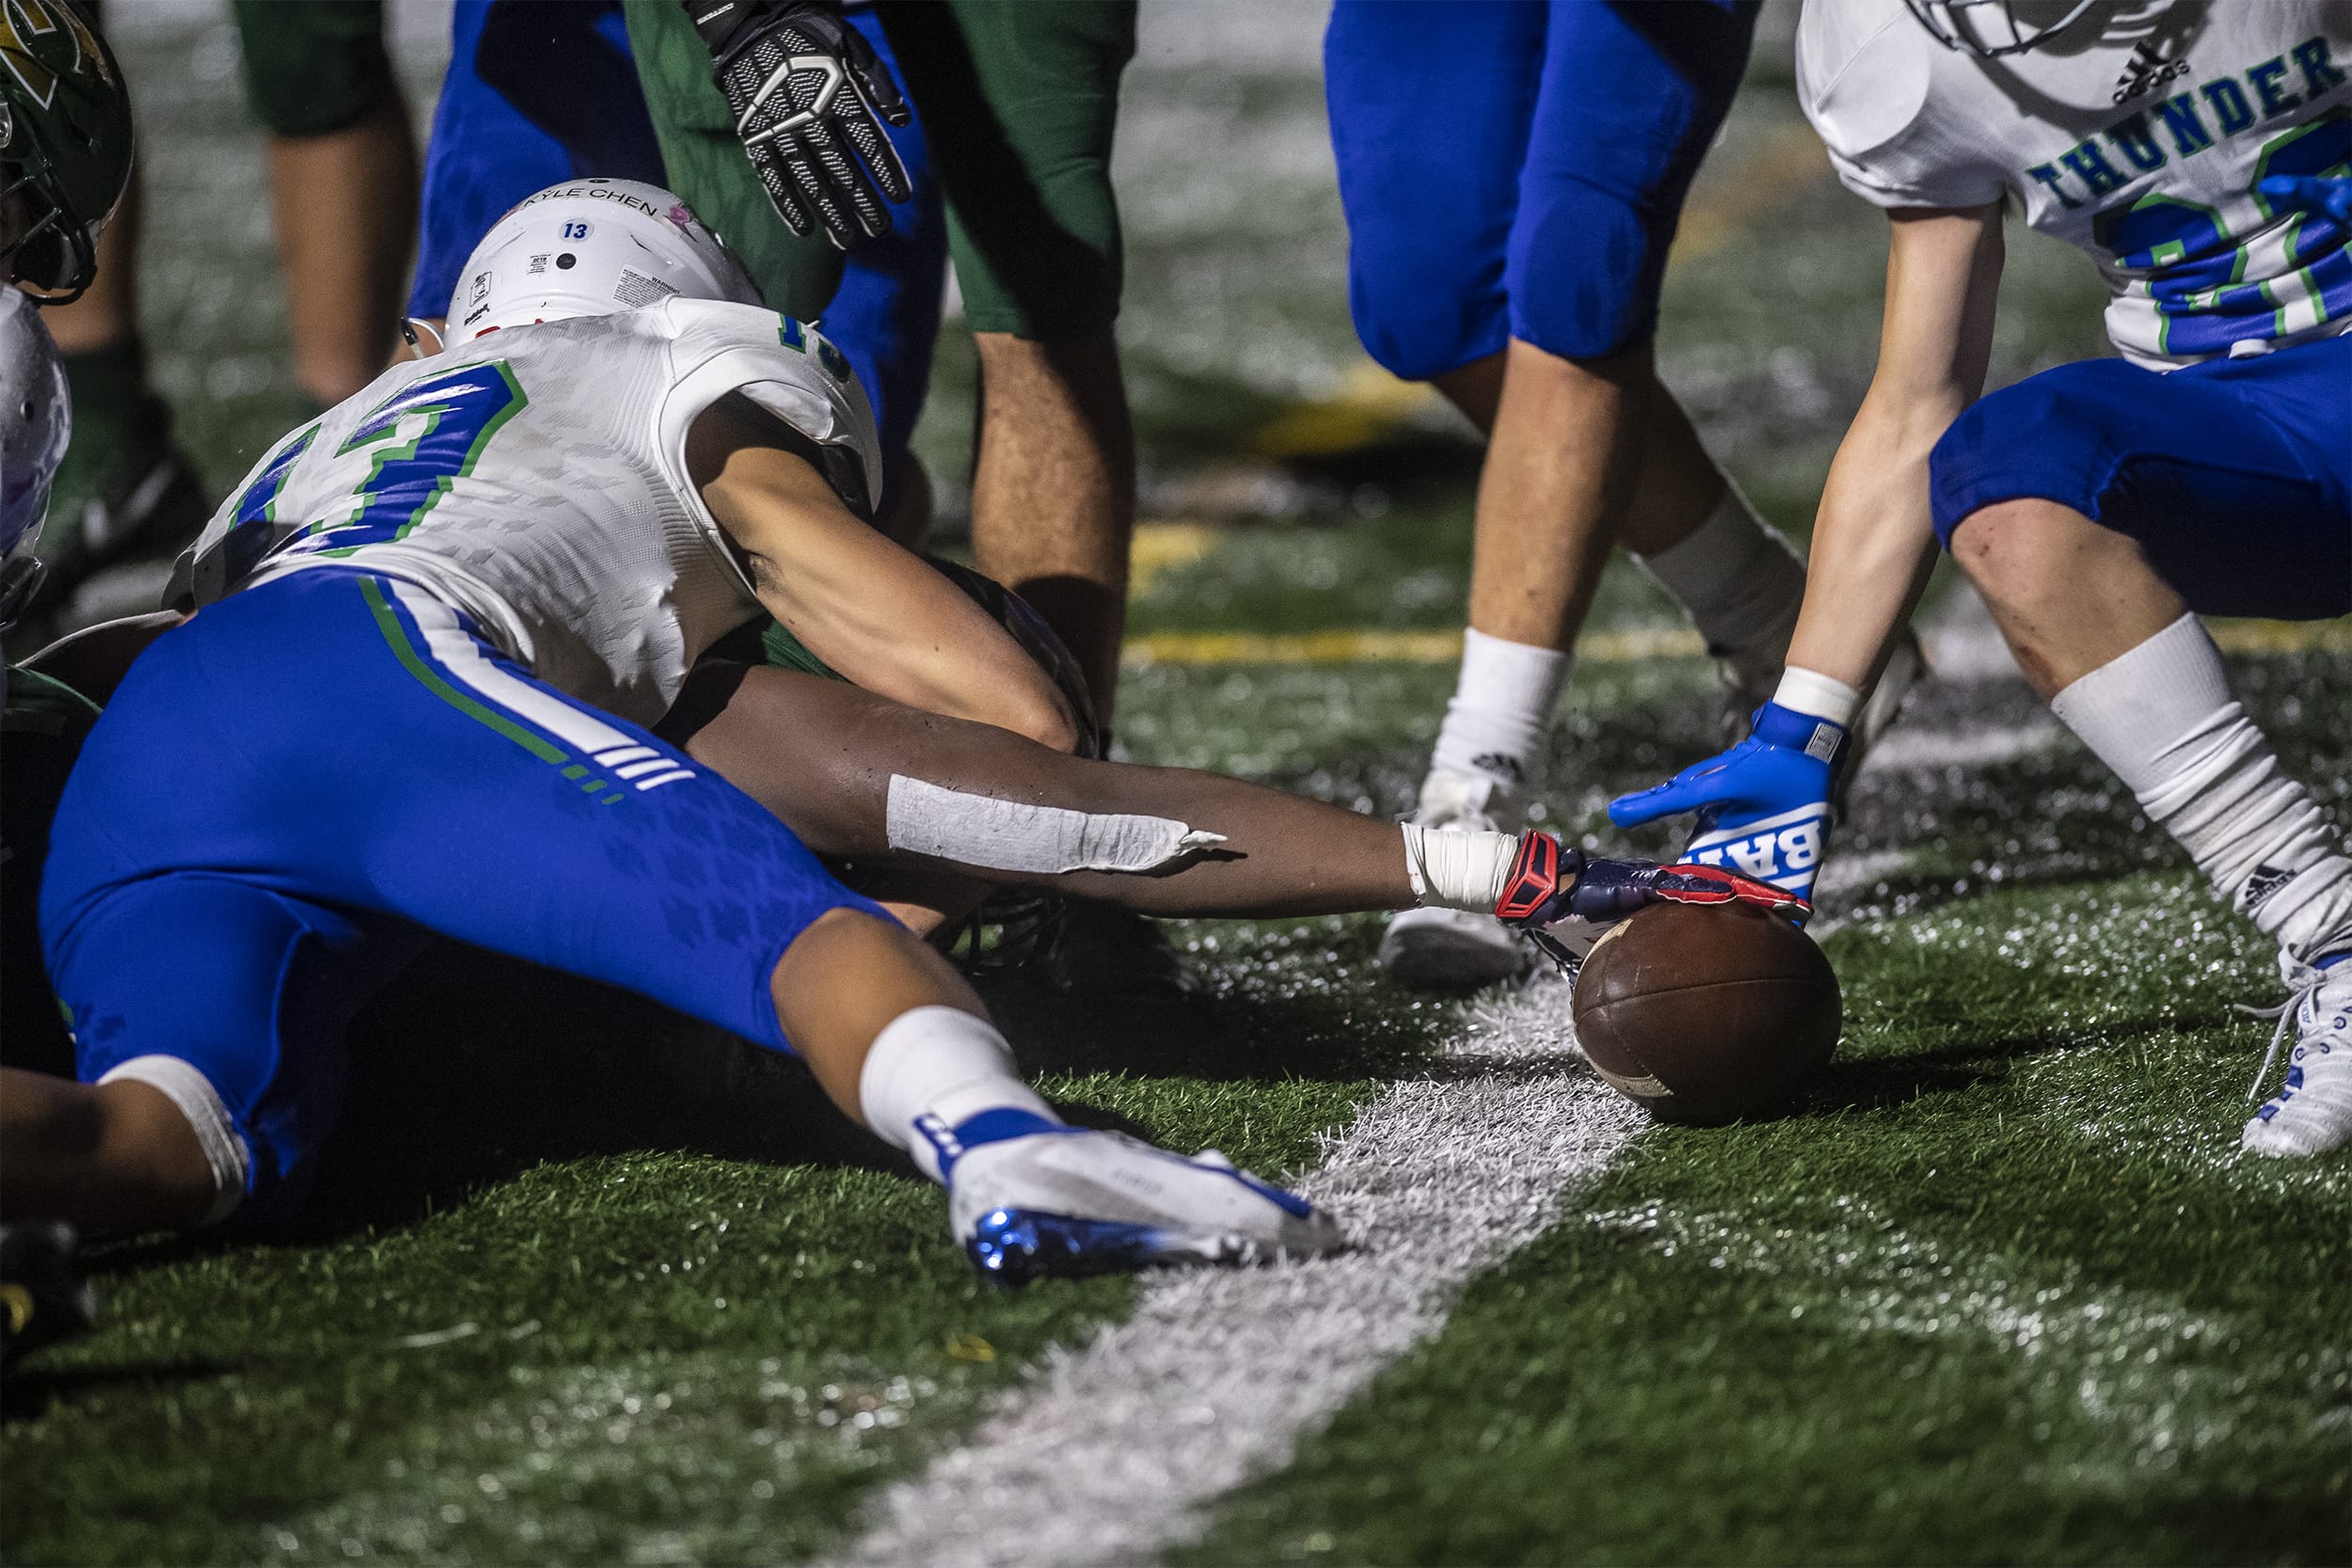 Evergreen’s Tyvauntae Deloney reaches out to try and break the end zone plane during a game against Mountain View  at McKenzie Stadium on Friday night, Oct. 18, 2019.